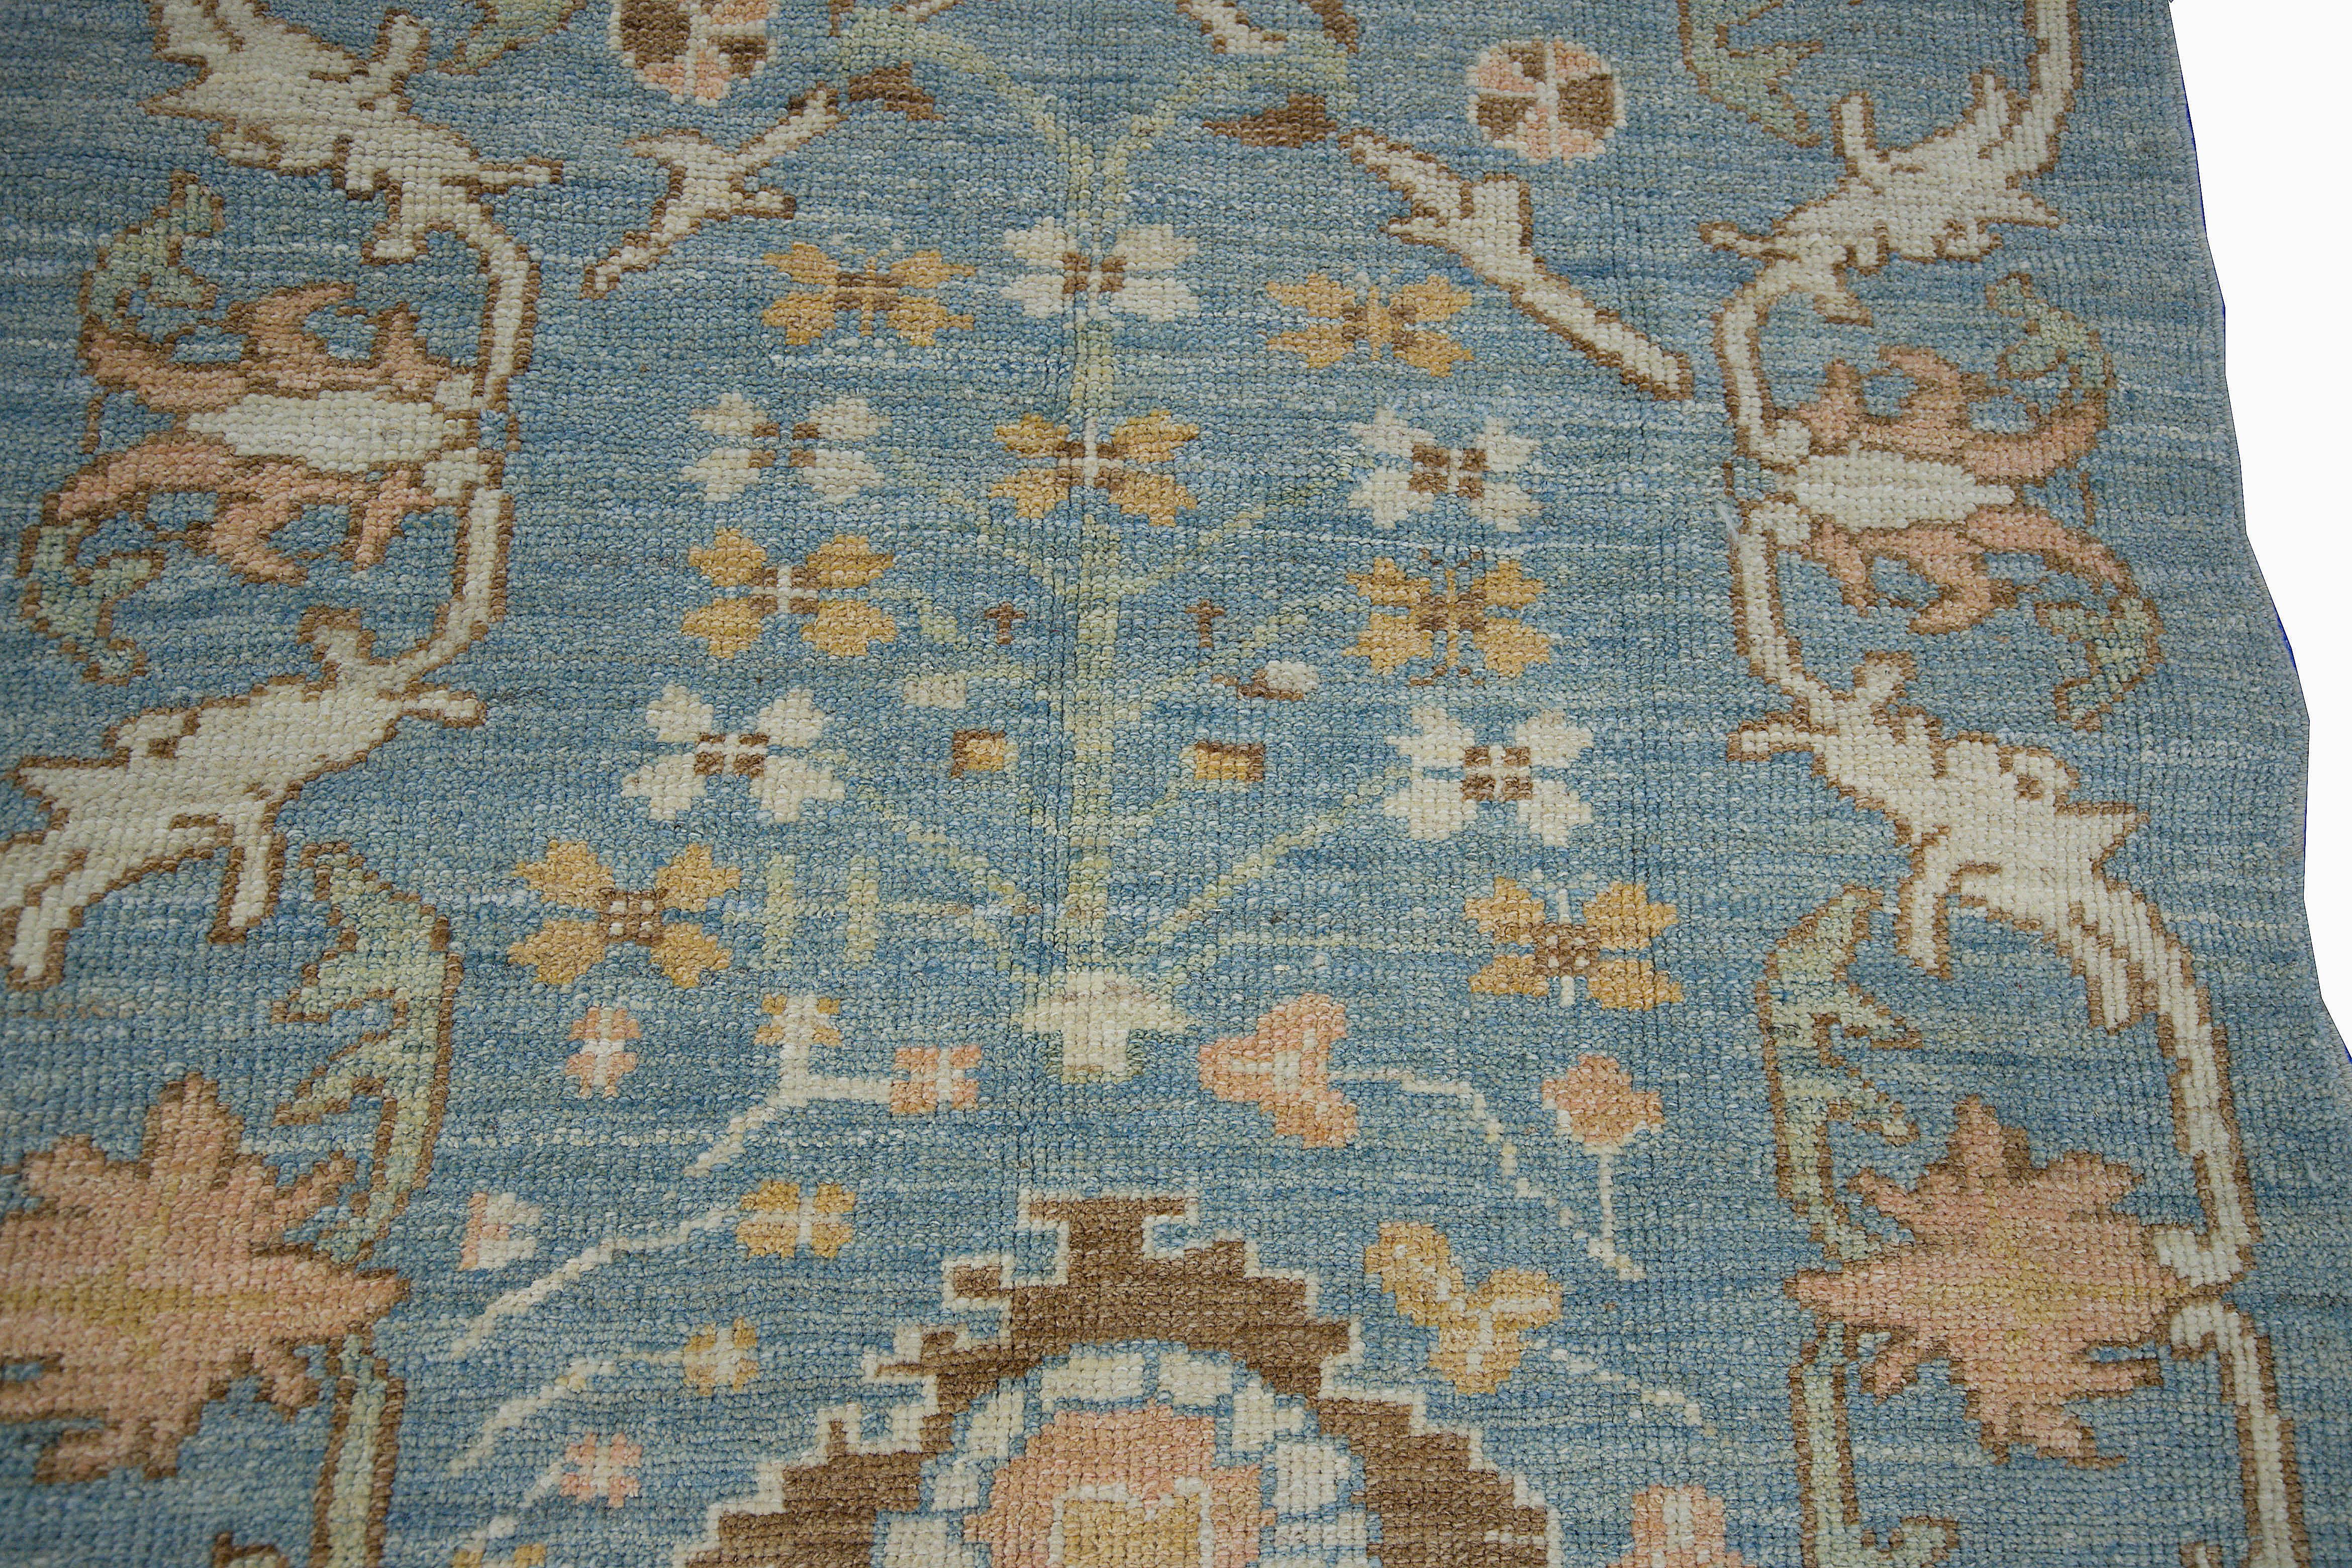 Modern Turkish rug made of handwoven sheep’s wool of the finest quality. It’s colored with organic vegetable dyes that are certified safe for humans and pets alike. It features a lovely blue field with floral details in ivory, brown and orange